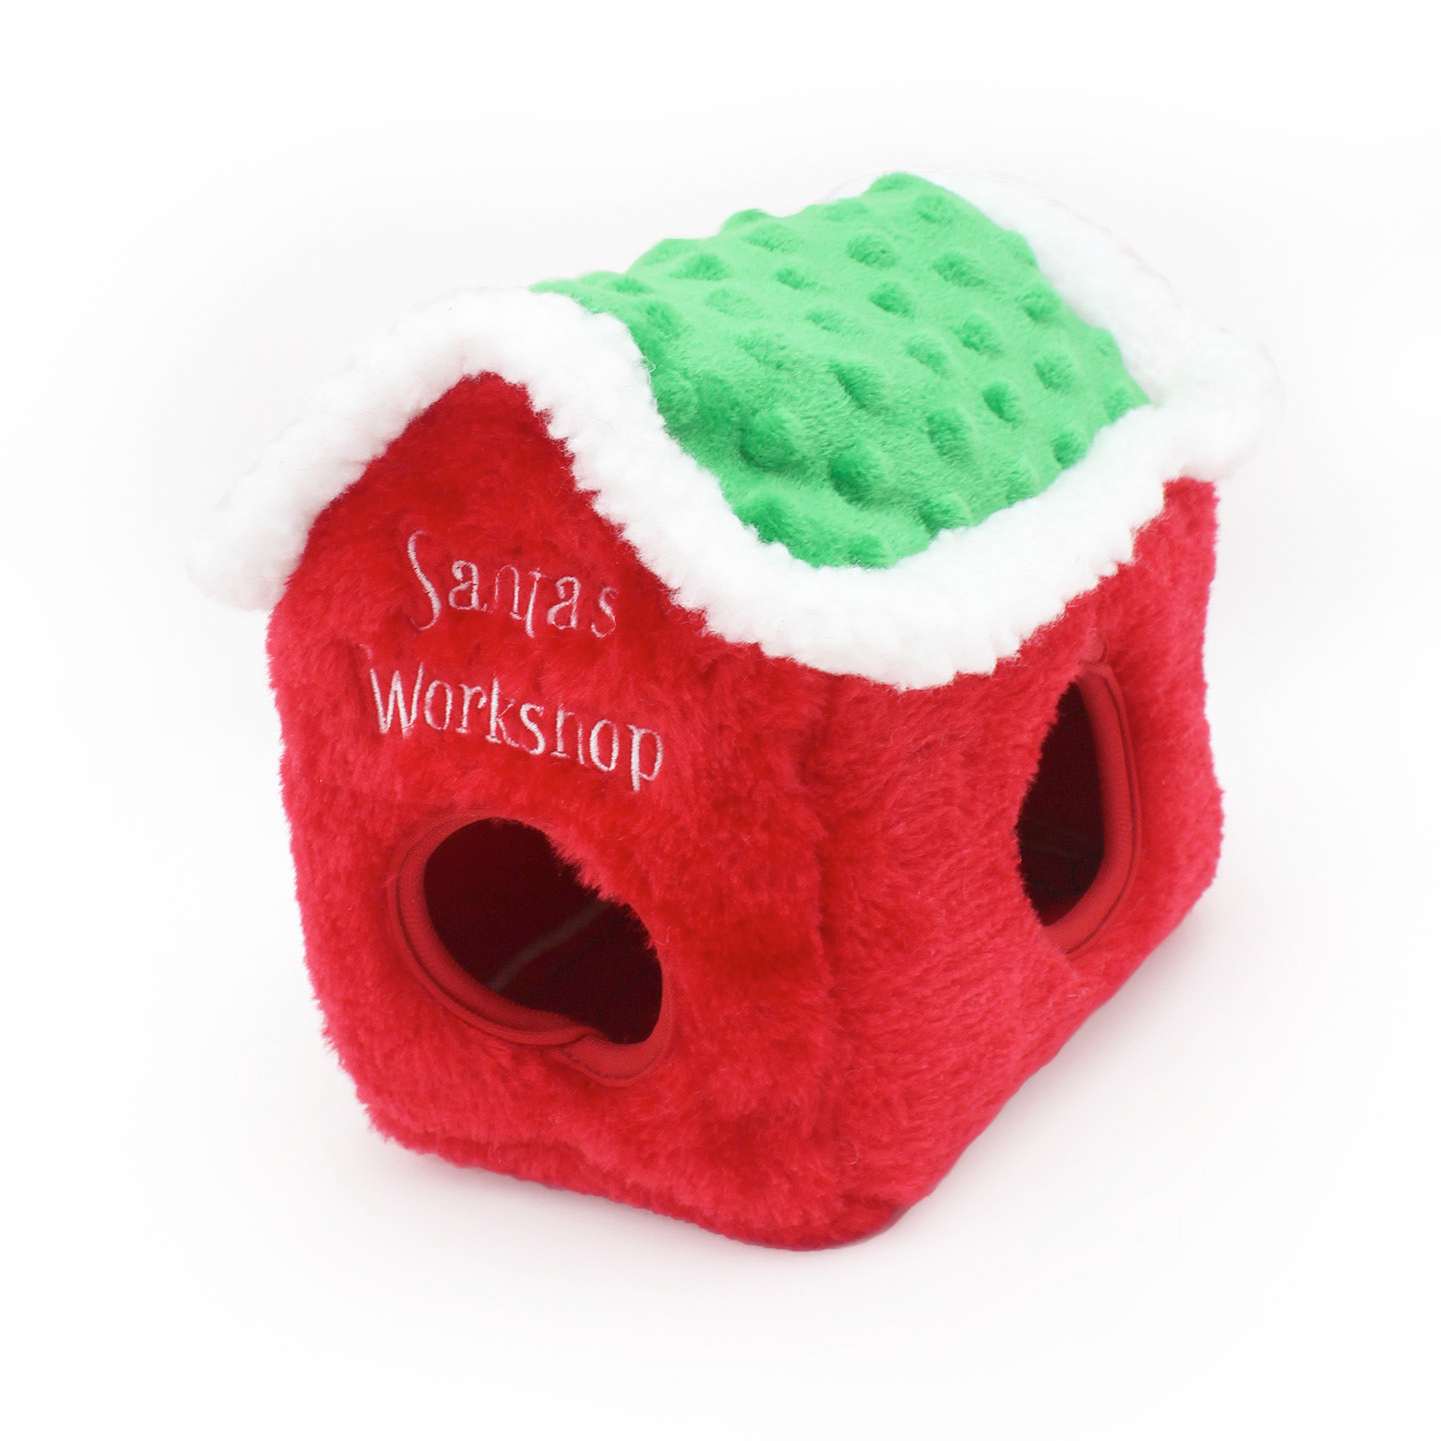 Zippy Holiday Burrow Sniff 'n Search Squeaky Dog Toy, Santa's Workshop